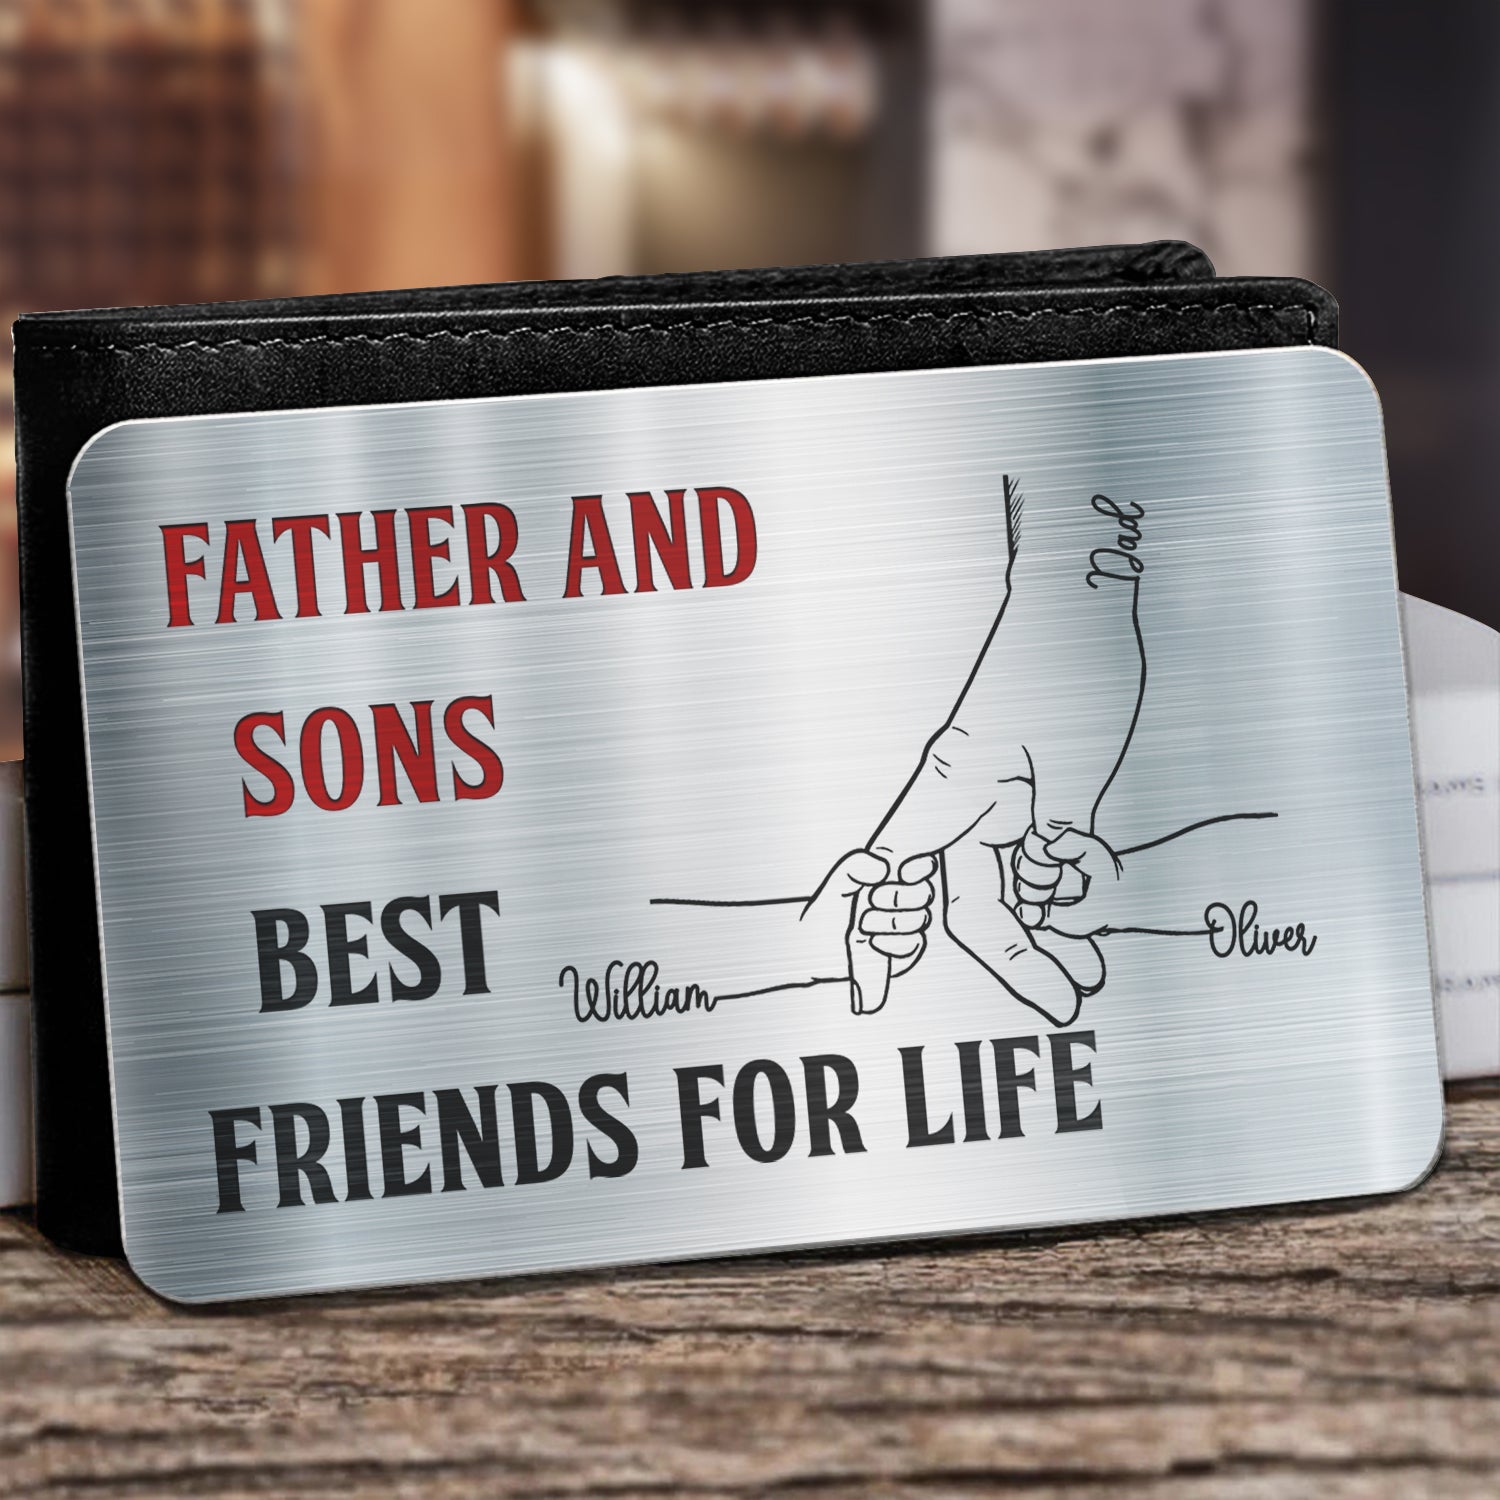 Father And Son Best Friends For Life - Gift For Dad, Father, Grandpa - Personalized Aluminum Wallet Card